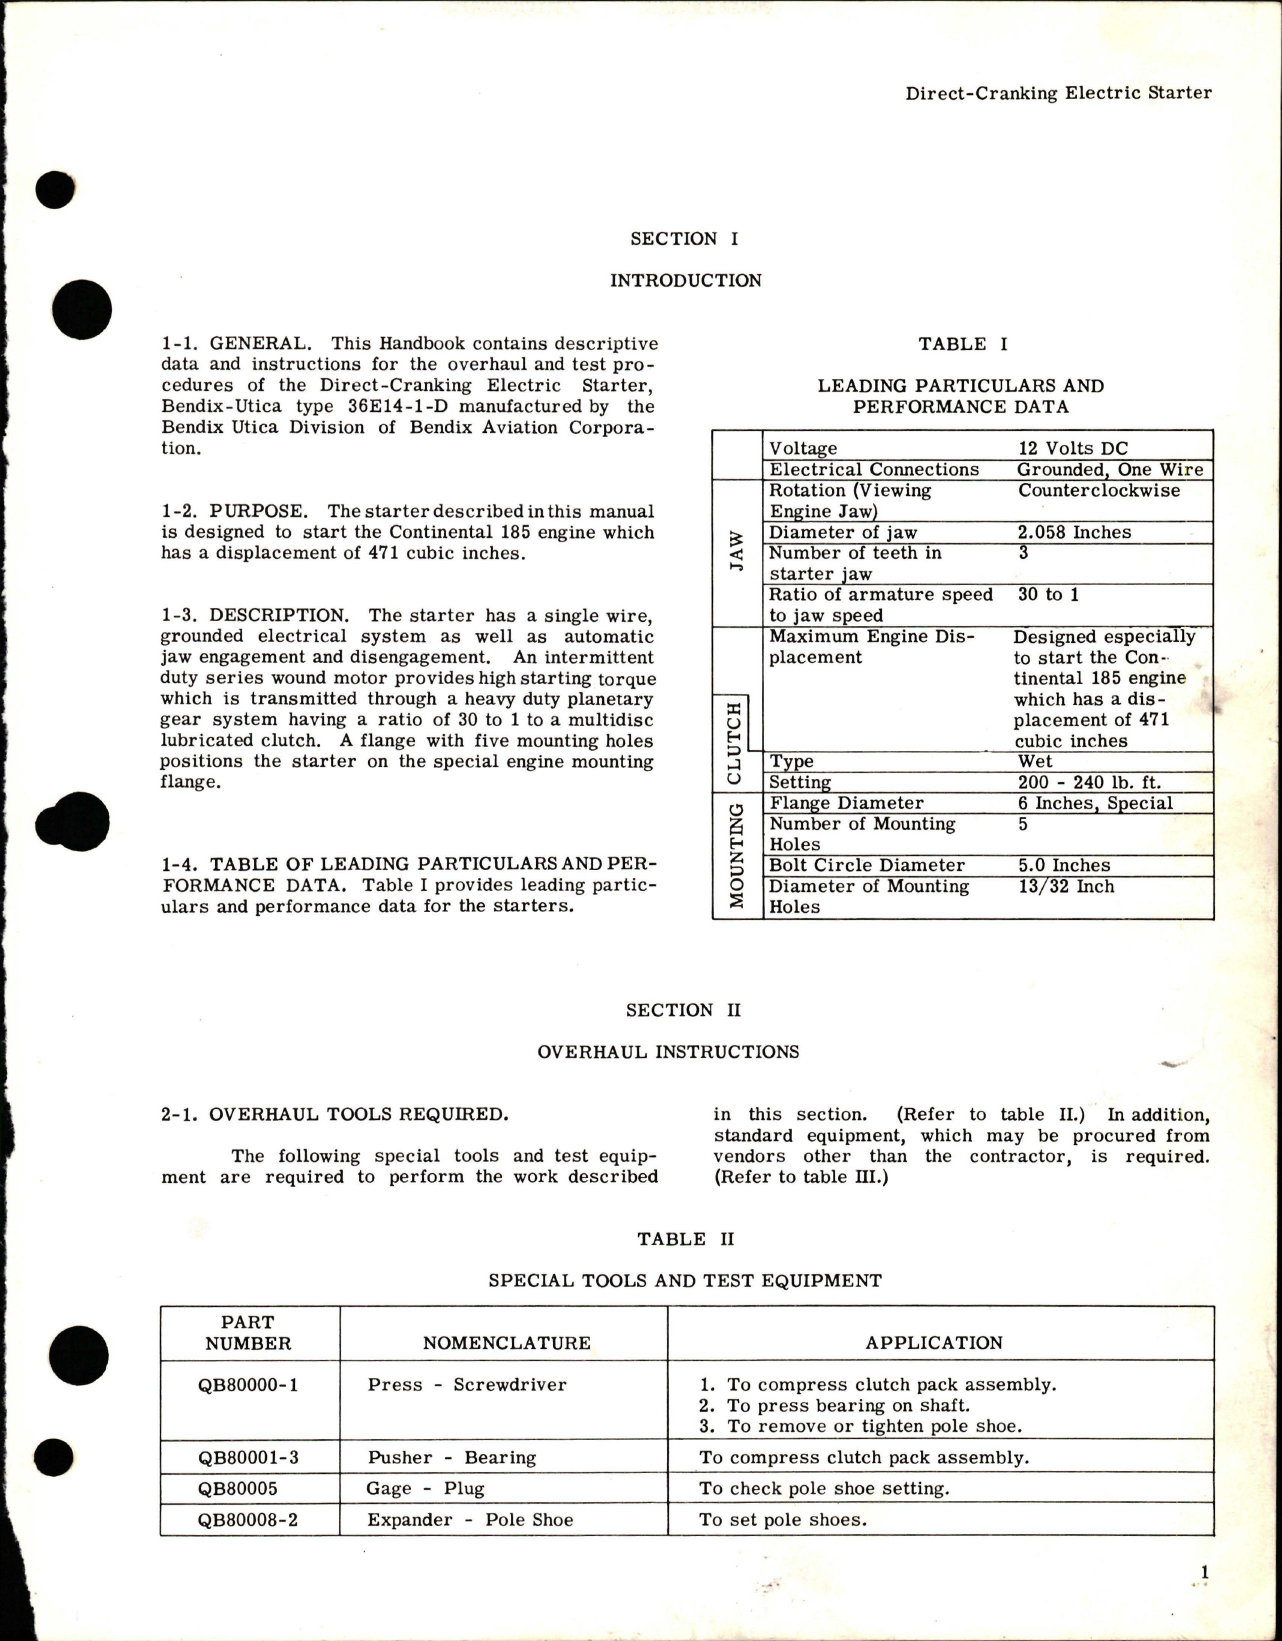 Sample page 5 from AirCorps Library document: Overhaul Instructions for Direct-Cranking Electric Starter - Type 36E14-1-D